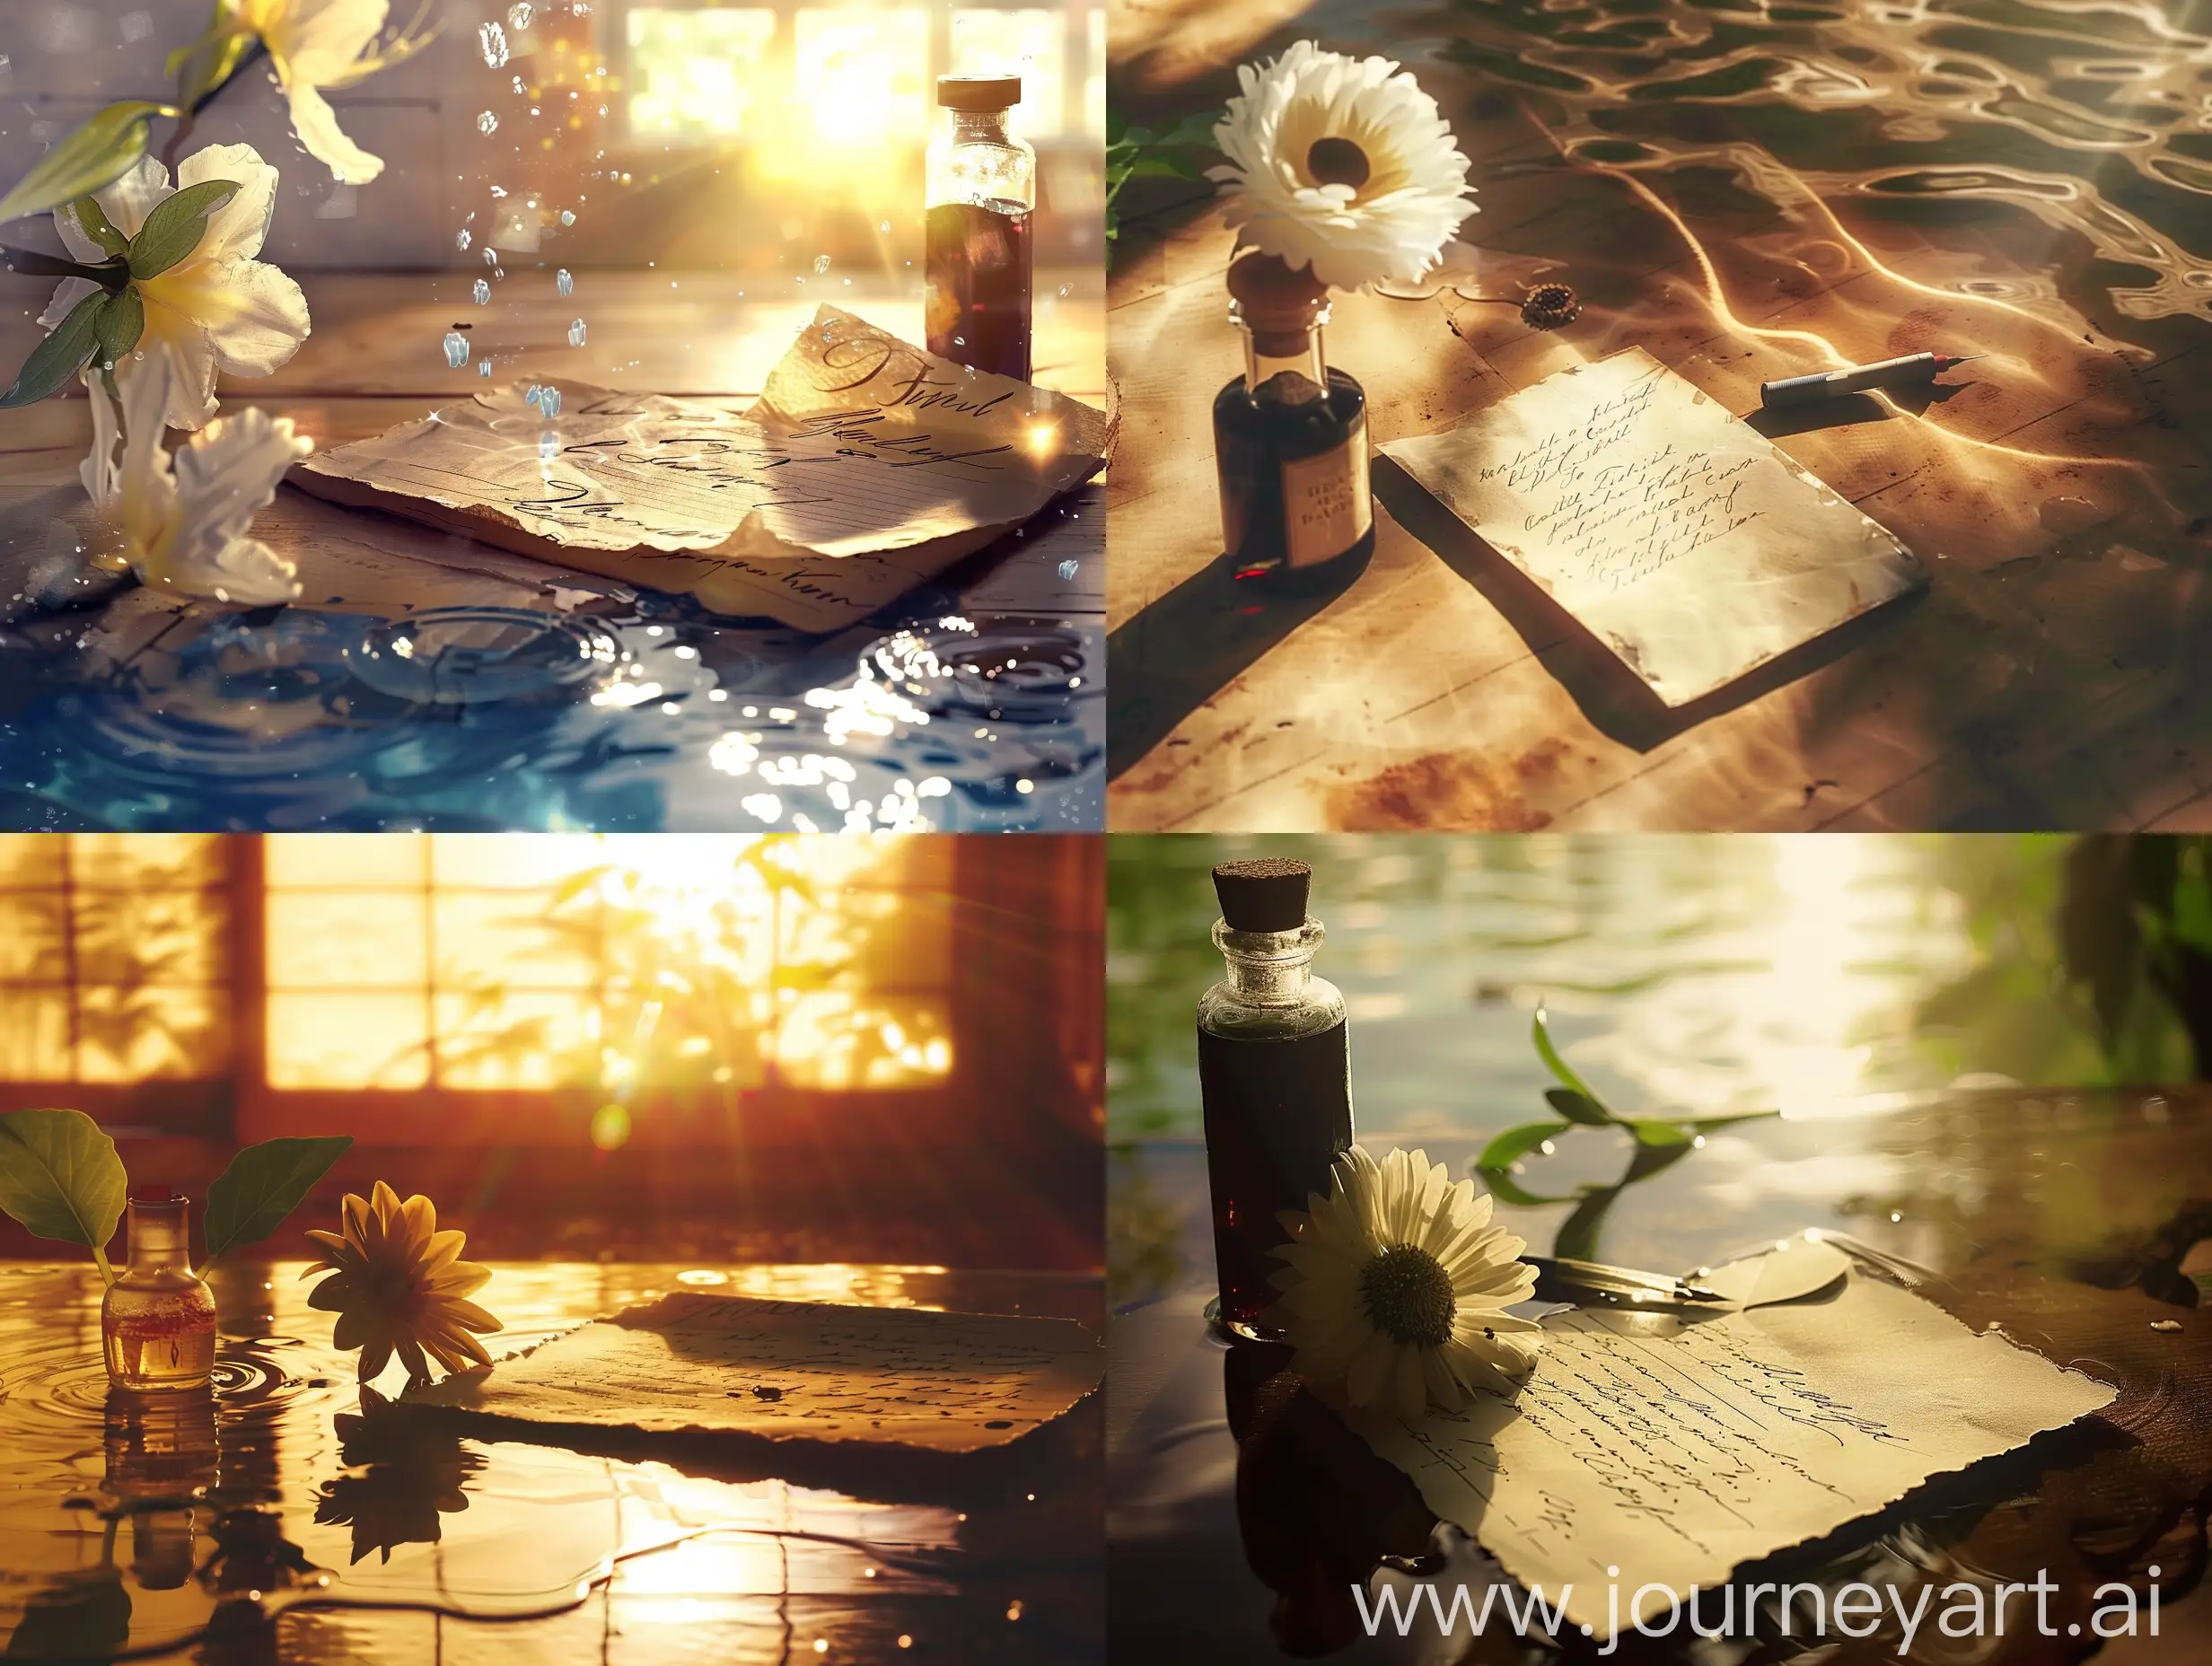 Vintage-Letter-on-Sunlit-Table-with-Floral-Ink-Art-Water-Anime-Style